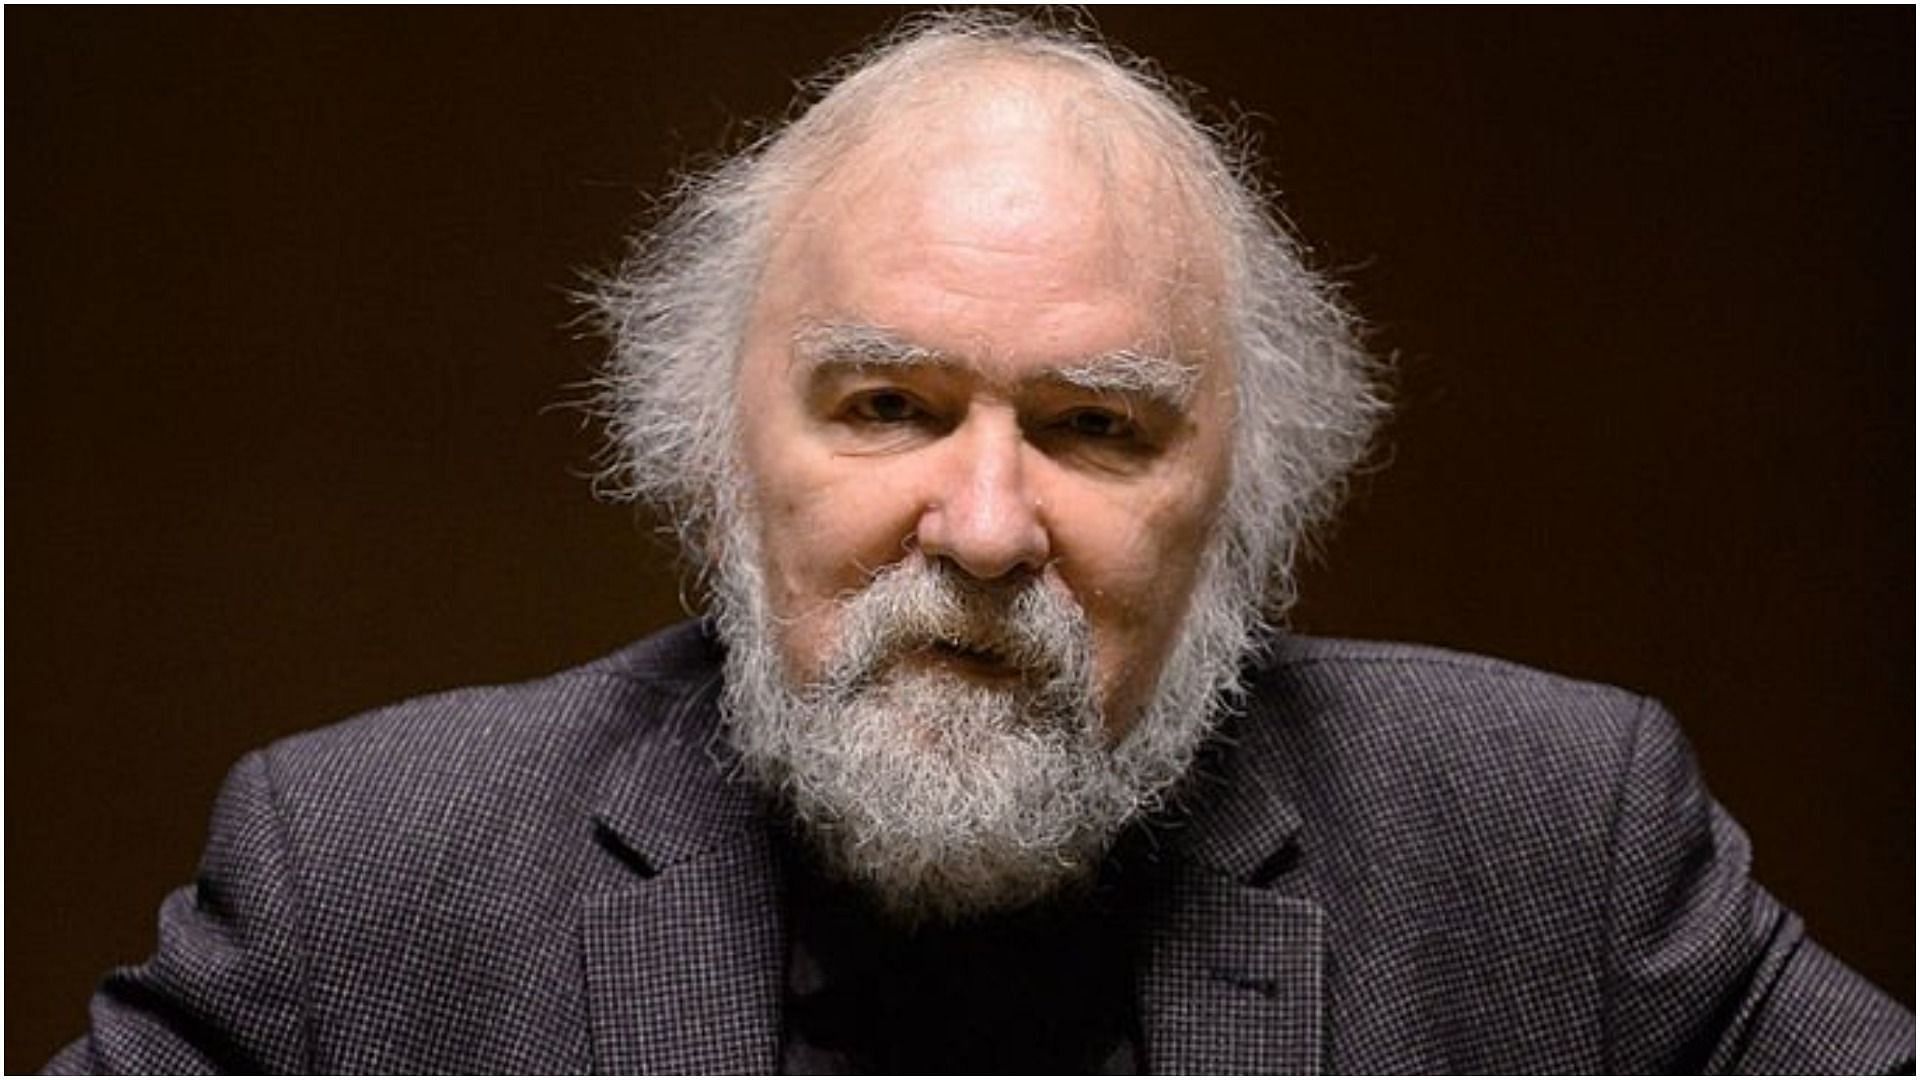 Radu Lupu recently died at the age of 76 (Image via Roberto Serra/Getty Images)